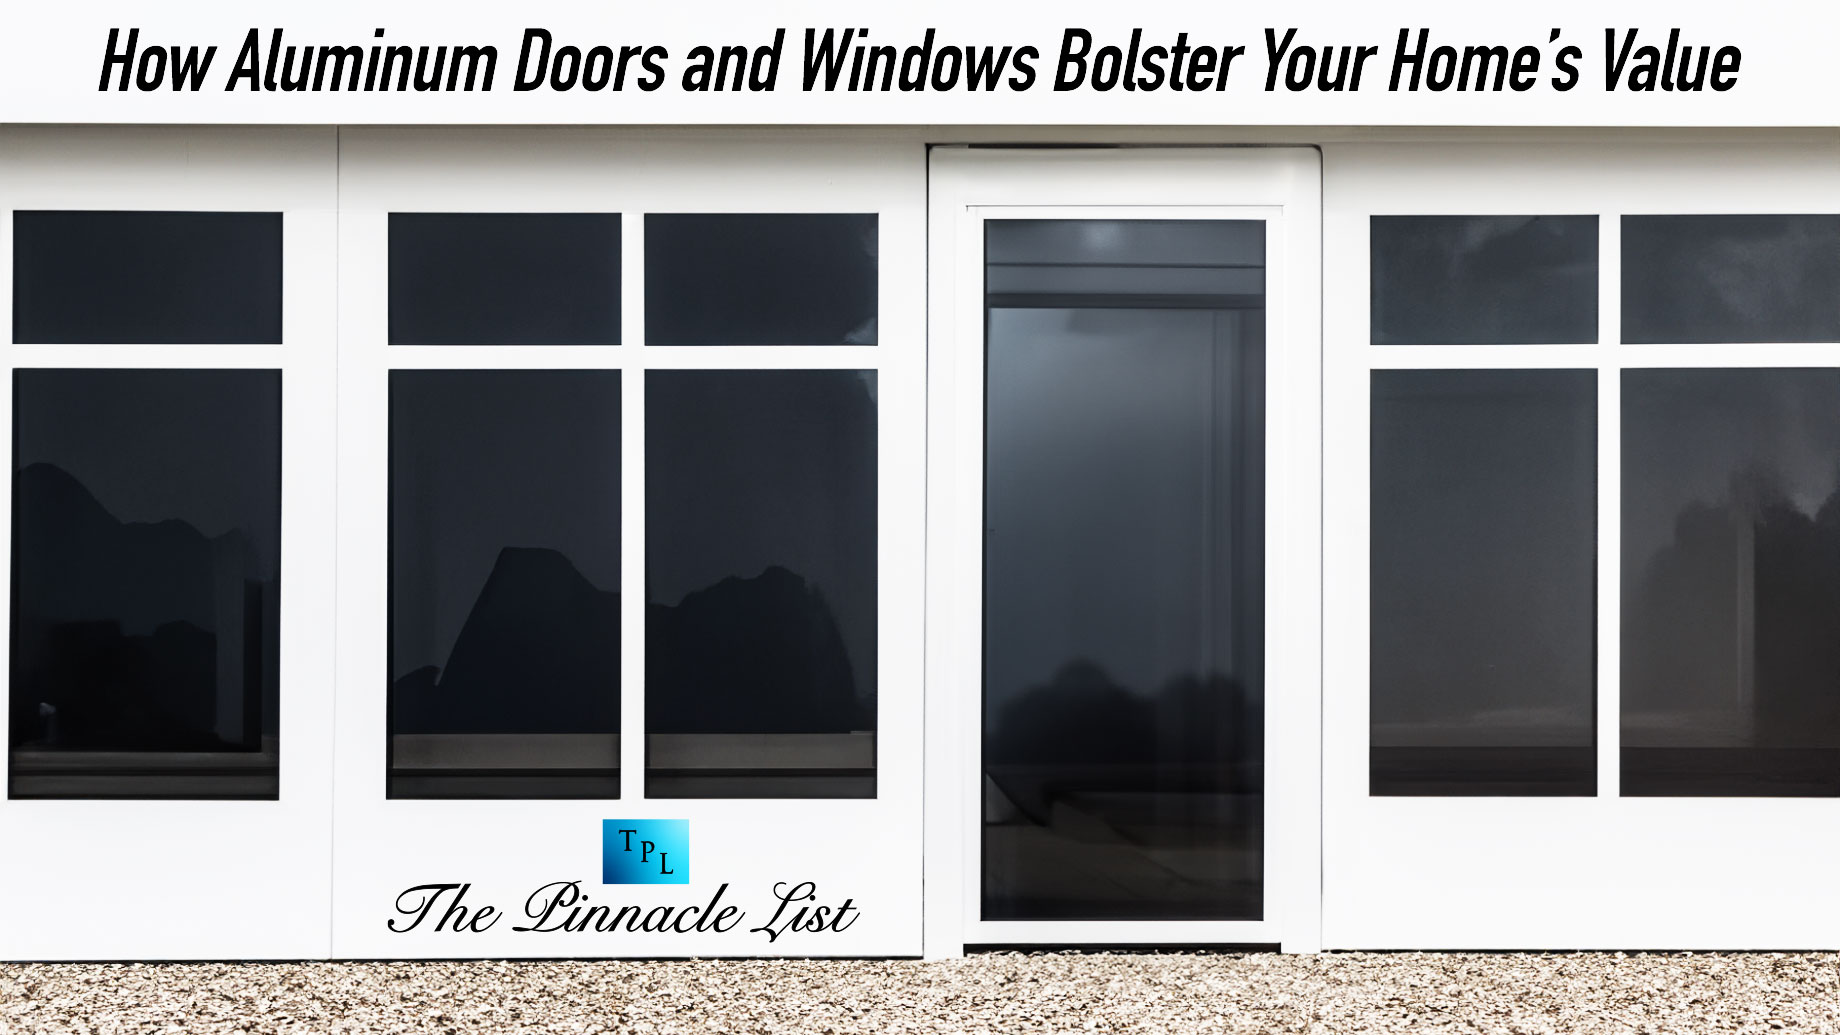 How Aluminum Doors and Windows Bolster Your Home’s Value